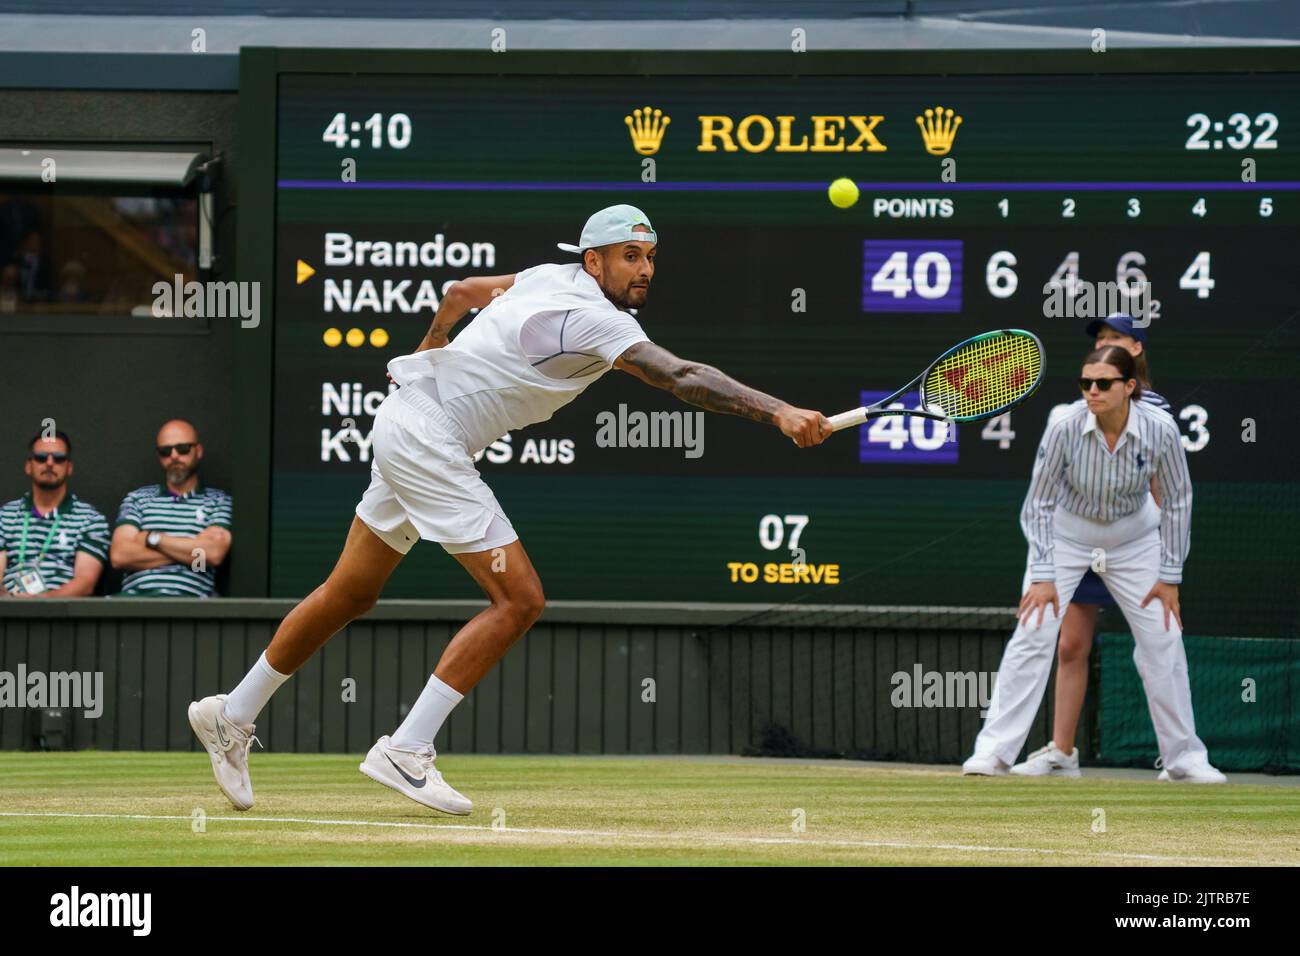 Nick Kyrgios of Australia in action on Centre Court at The Championships 2022. Held at The All England Lawn Tennis Club, Wimbledon. Stock Photo